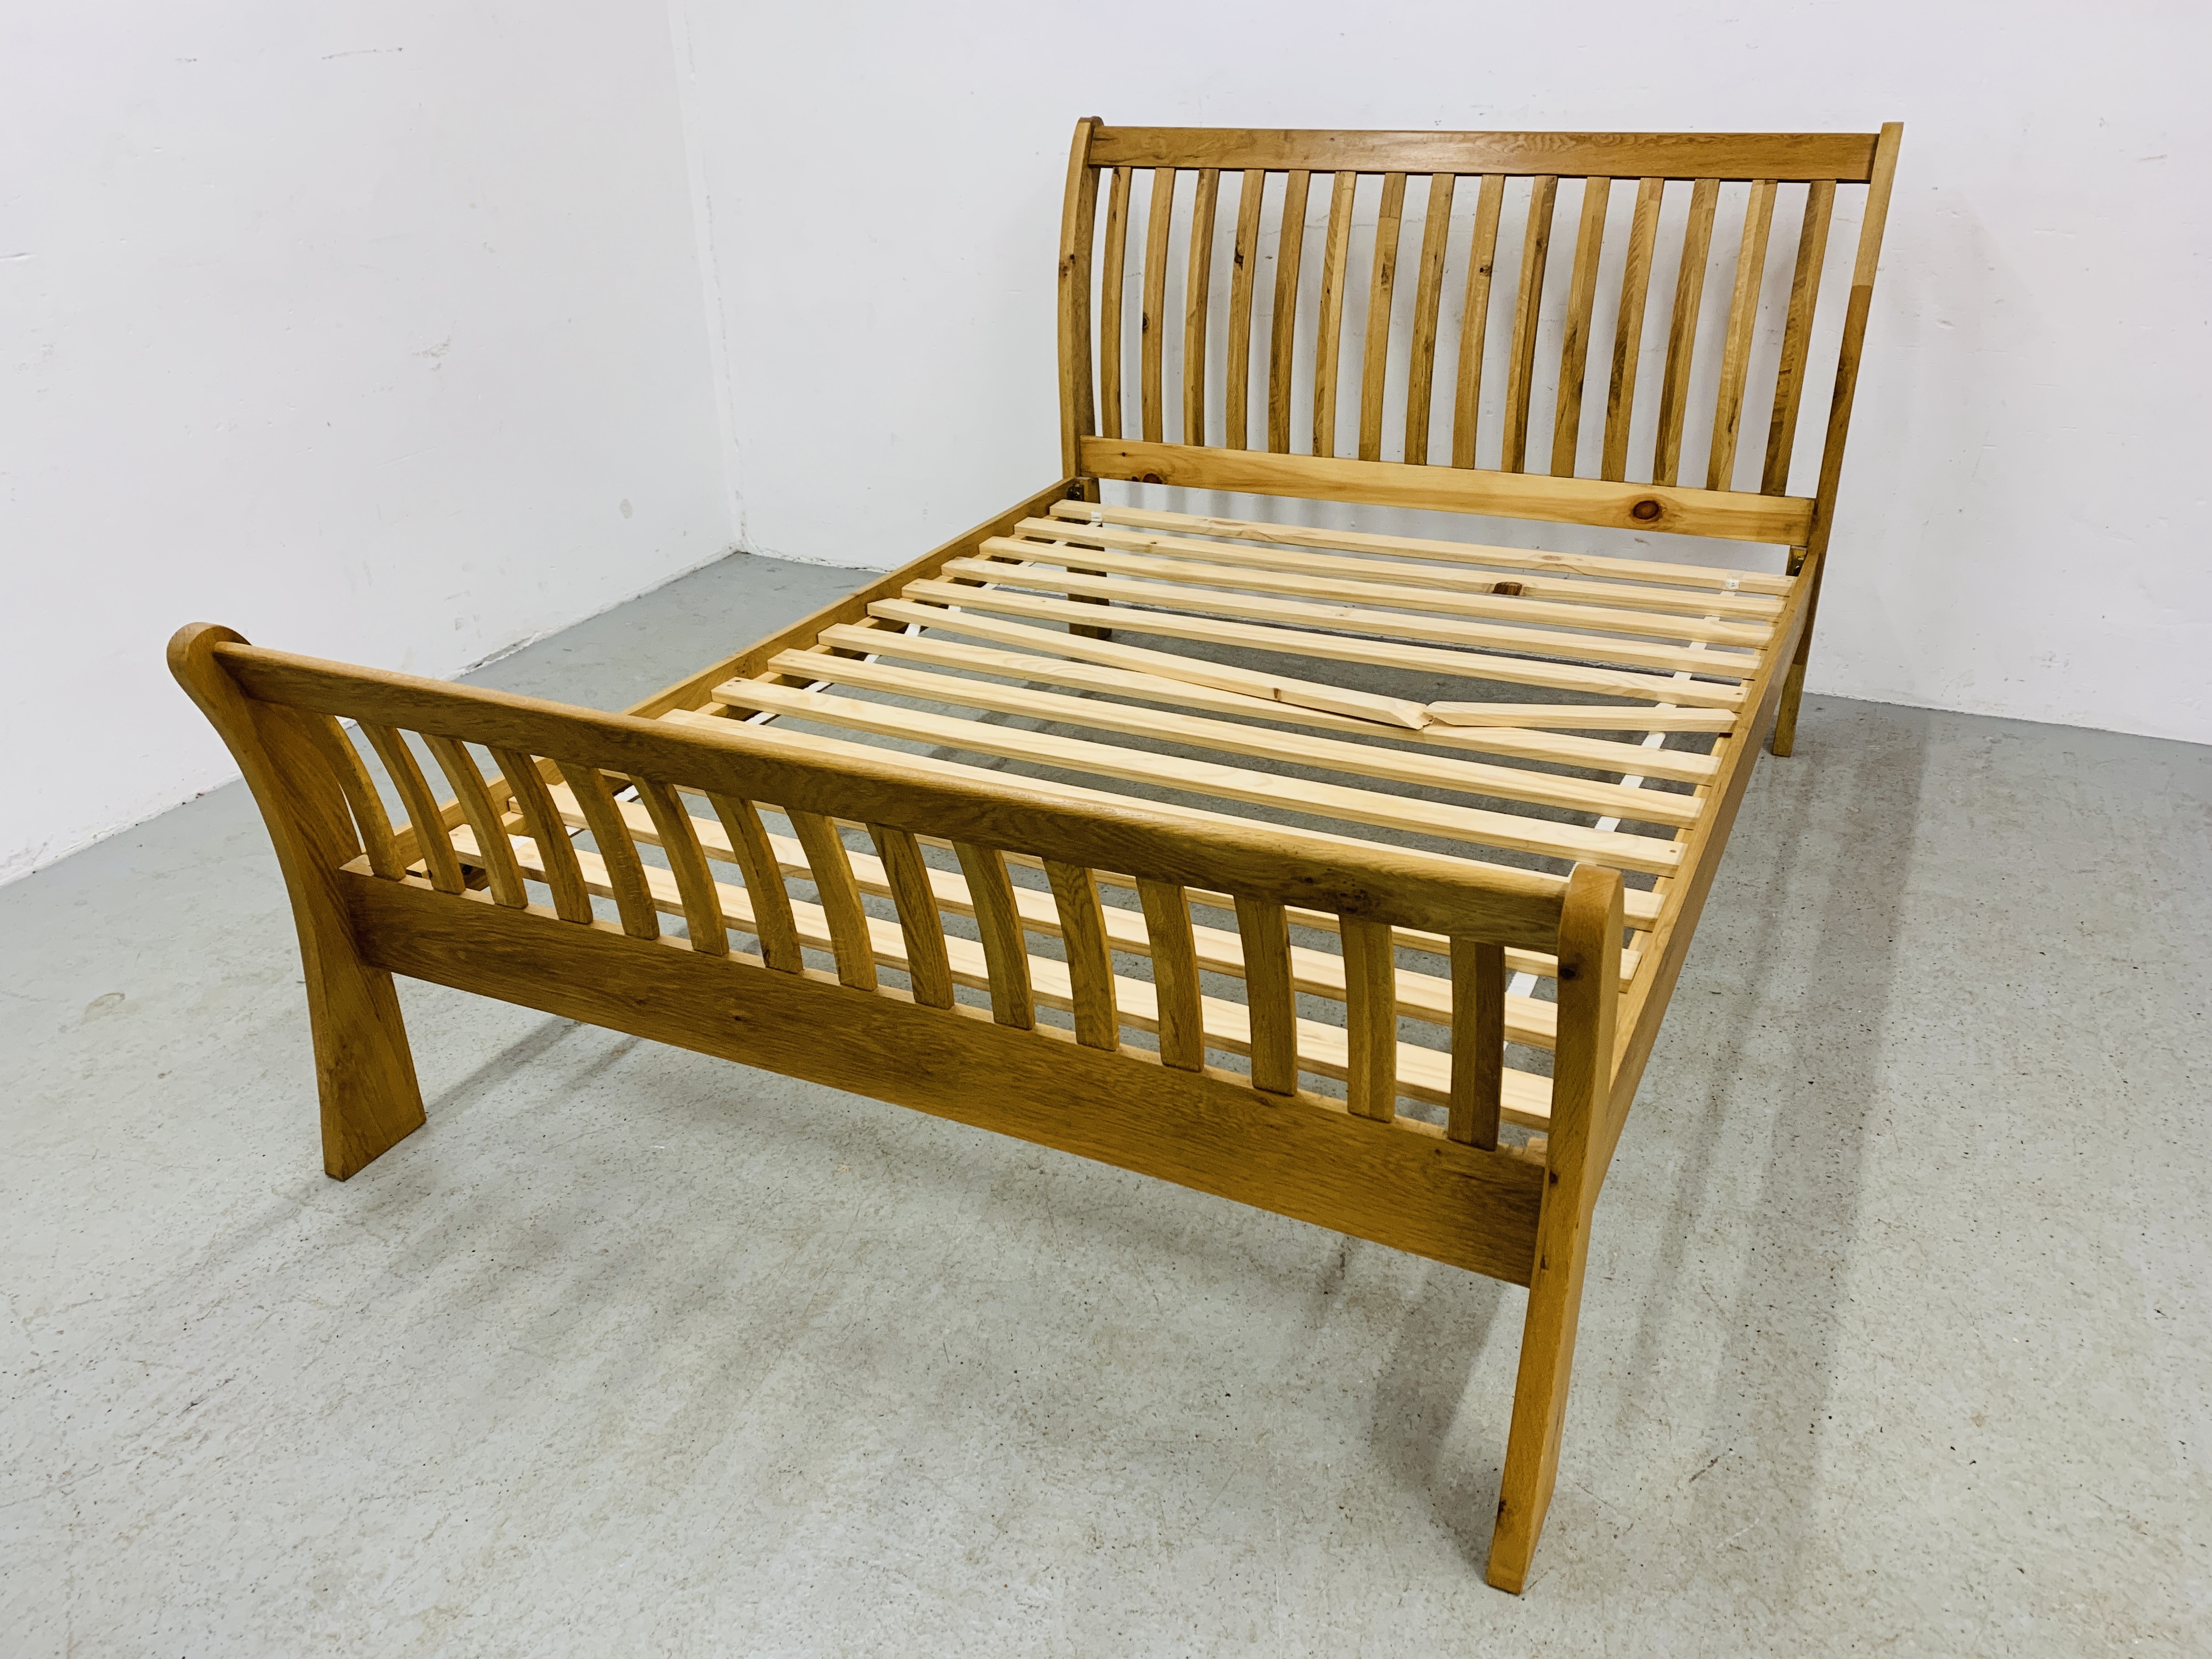 MODERN LIGHT OAK FINISH KING SIZE BED FRAME WITH "THE SHIRE BED CO.